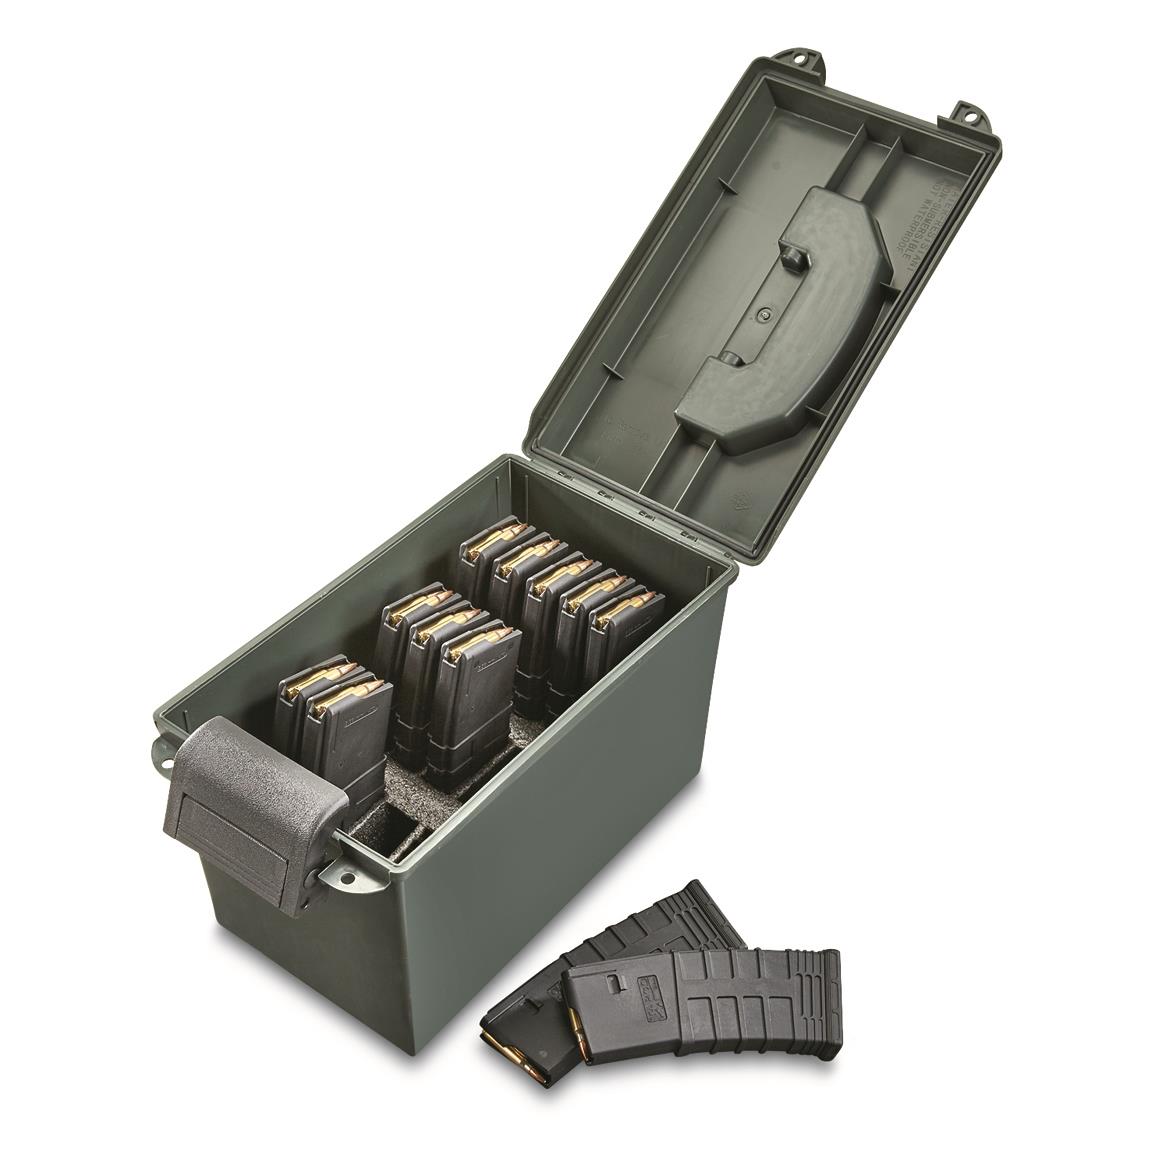 Holds 15 loaded 30 round mags